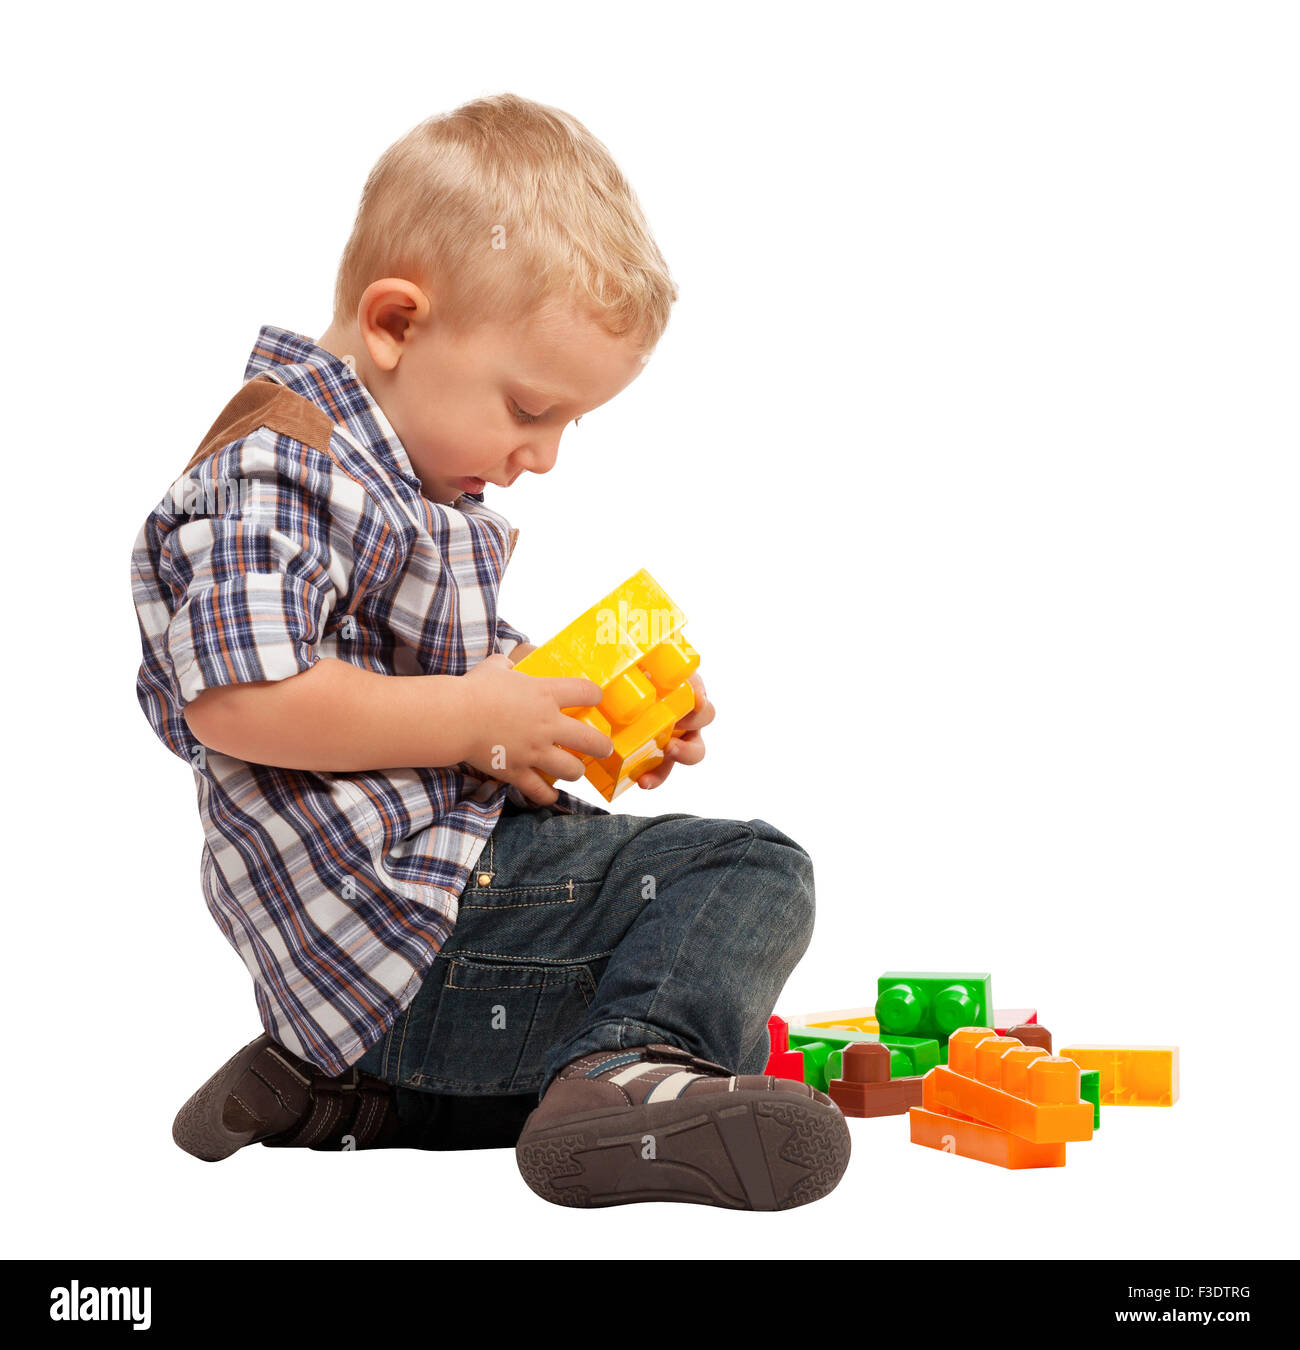 child play with construction toy blocks isolated on white Stock Photo